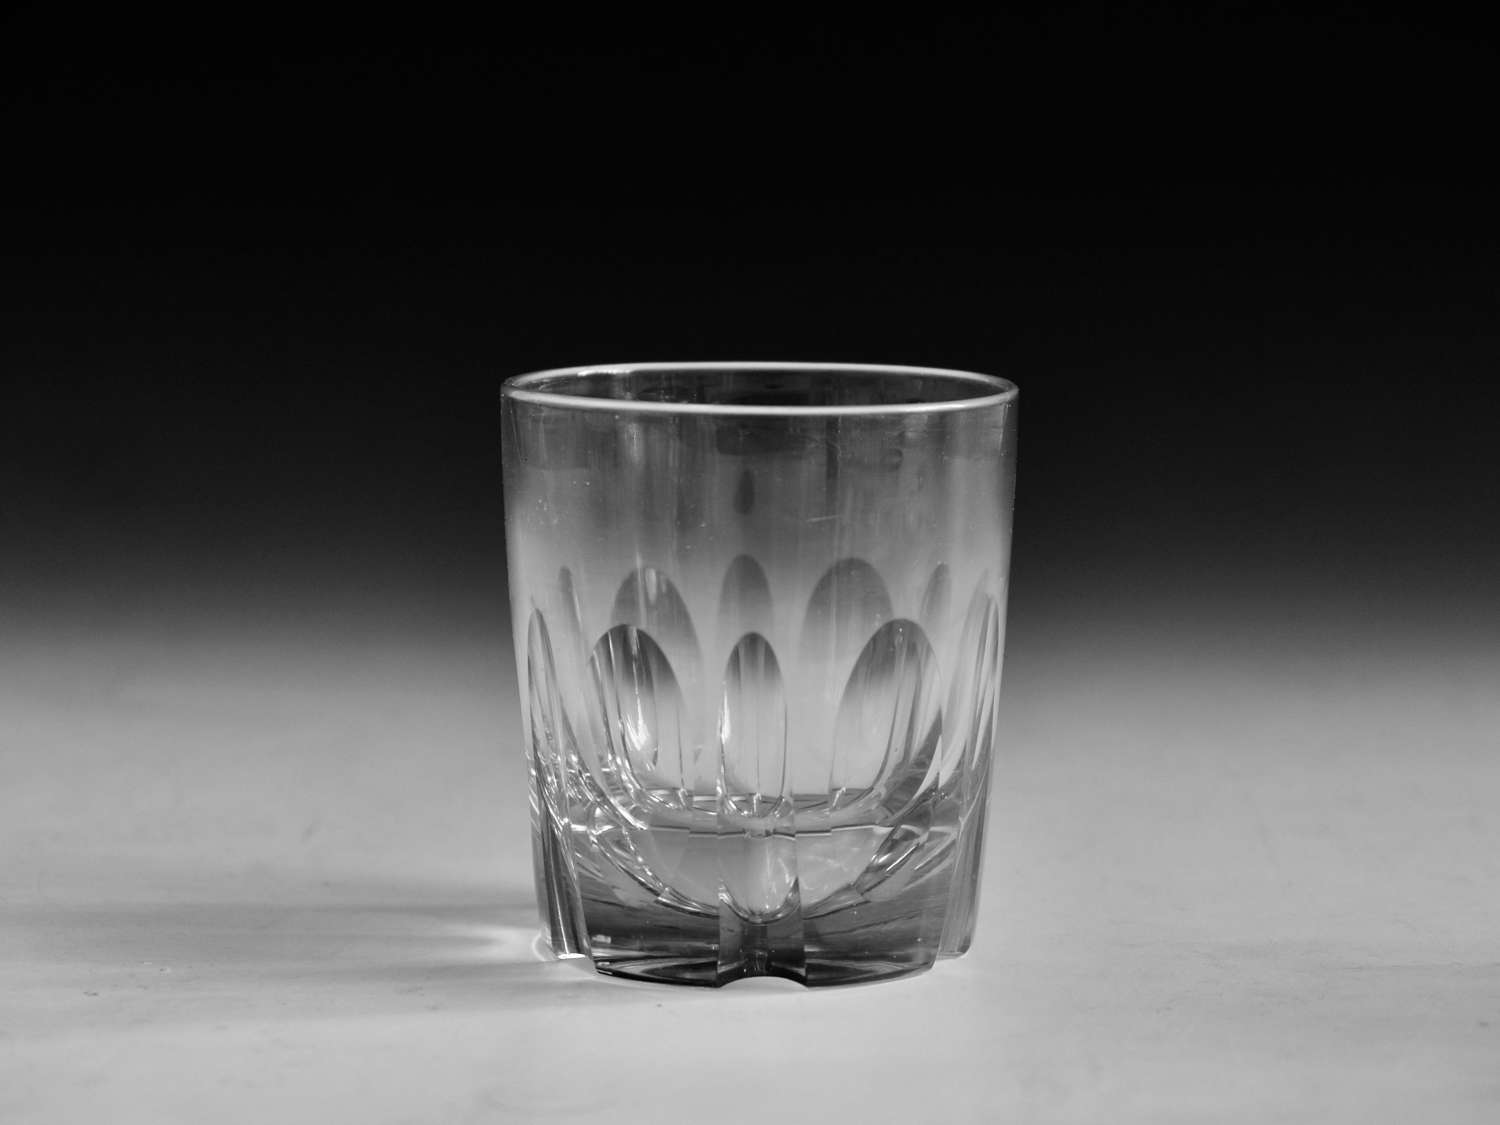 Antique glass - whisky tumbler English late 19th century